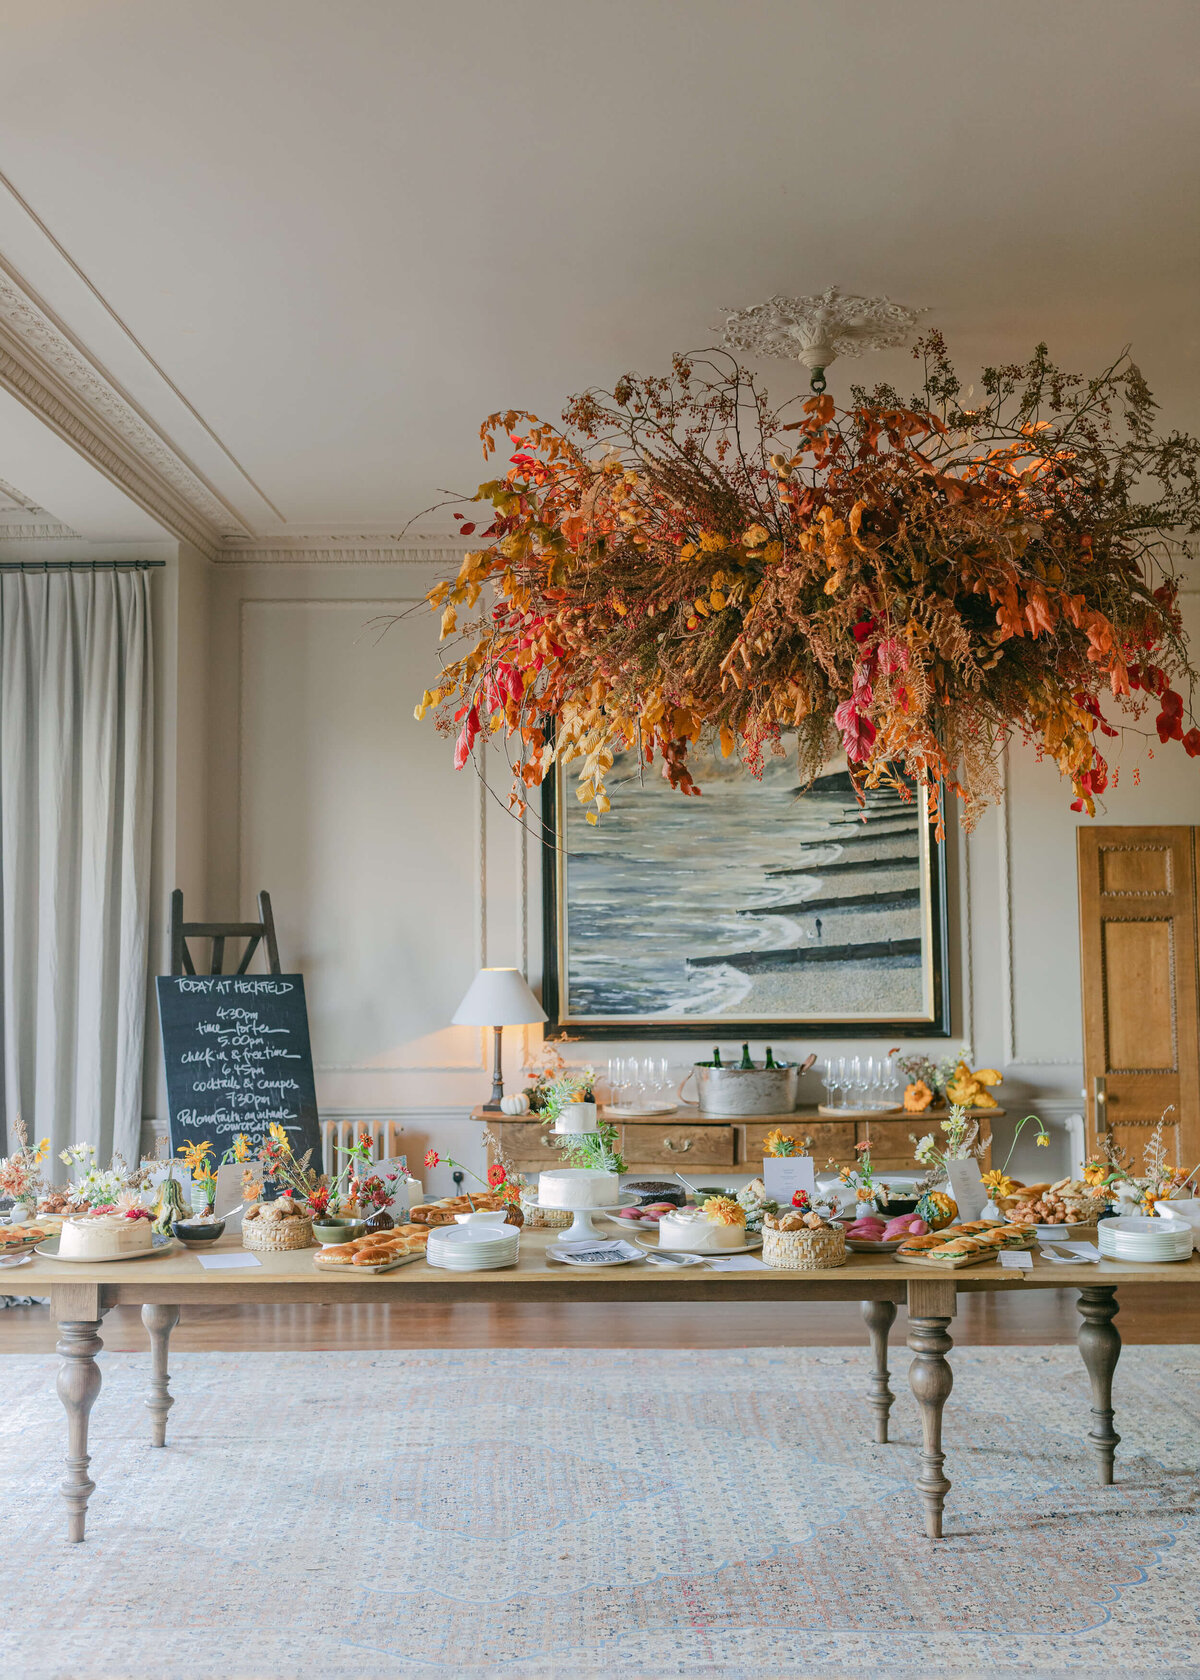 chloe-winstanley-events-heckfield-place-interiors-resturant-afteroon-tea